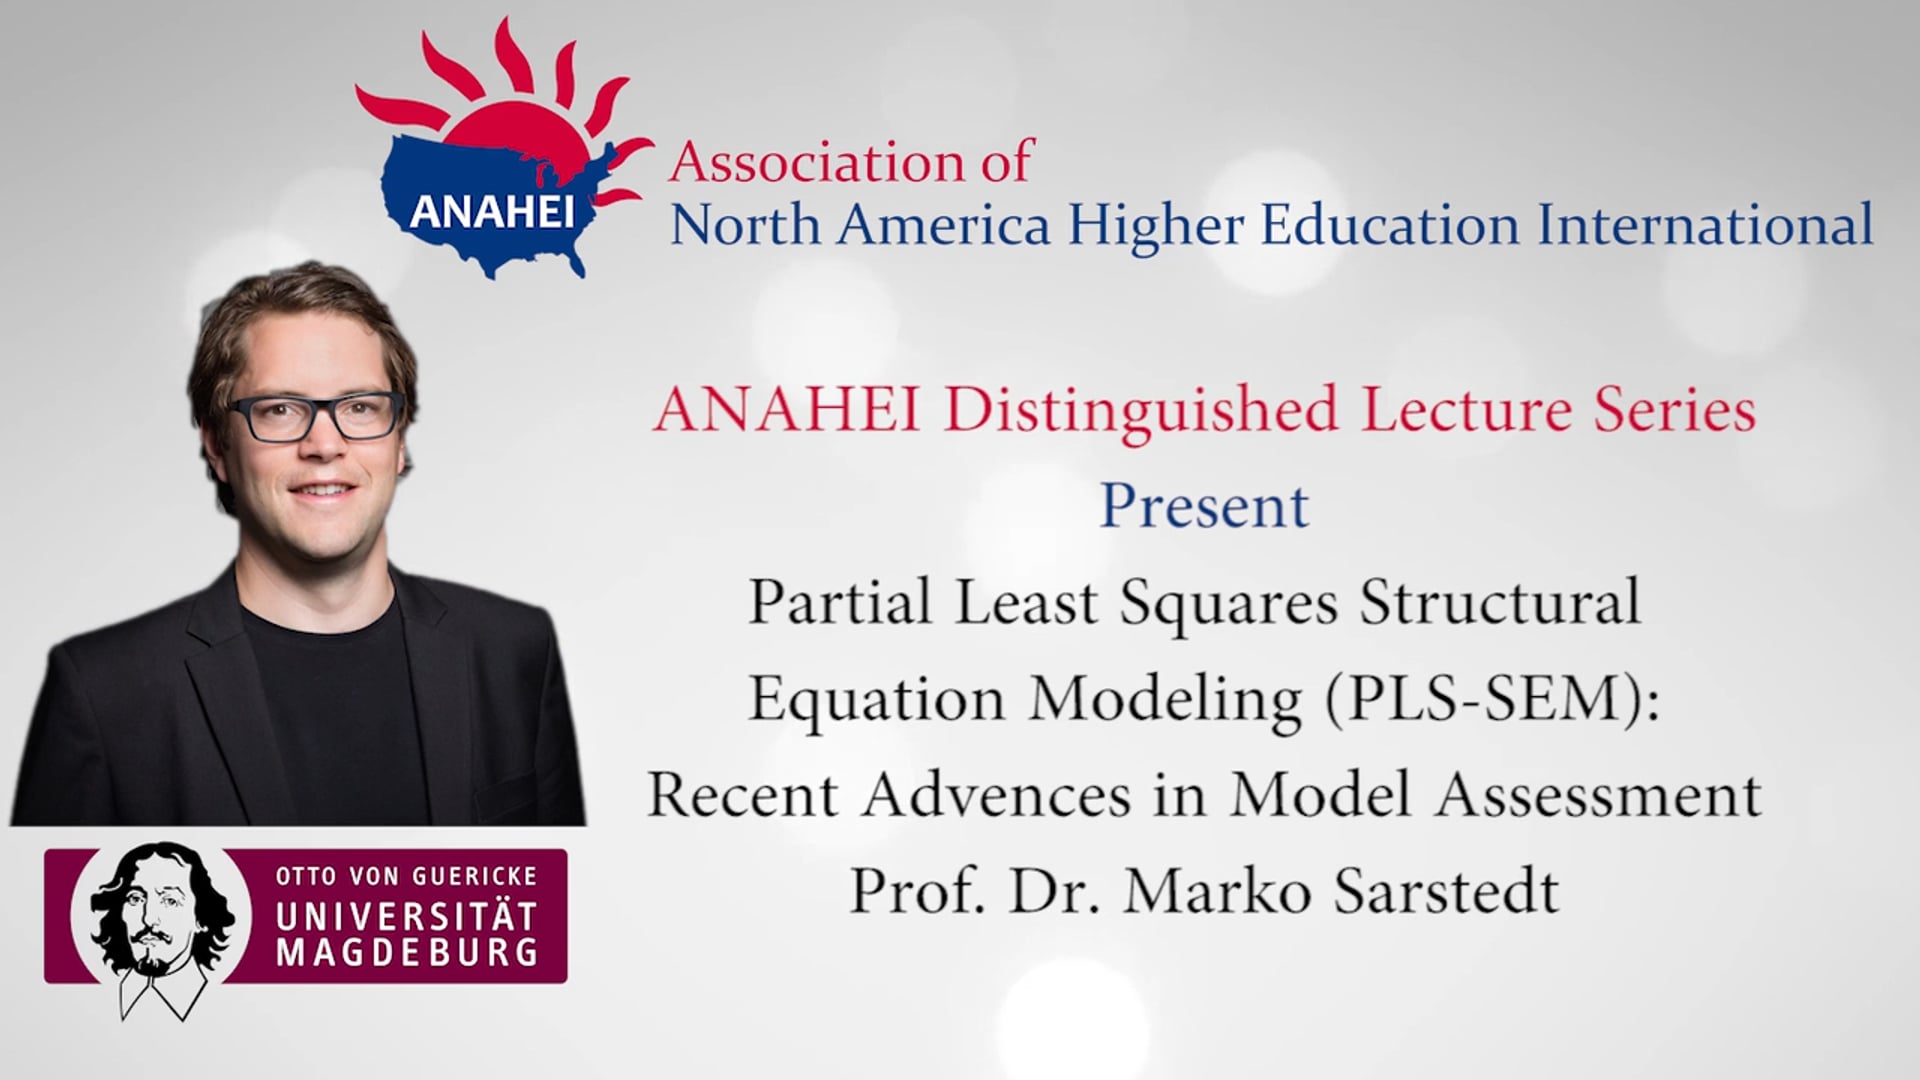 ANAHEI Distinguished Lecture Series:Prof. Dr. Marko Sarstedt